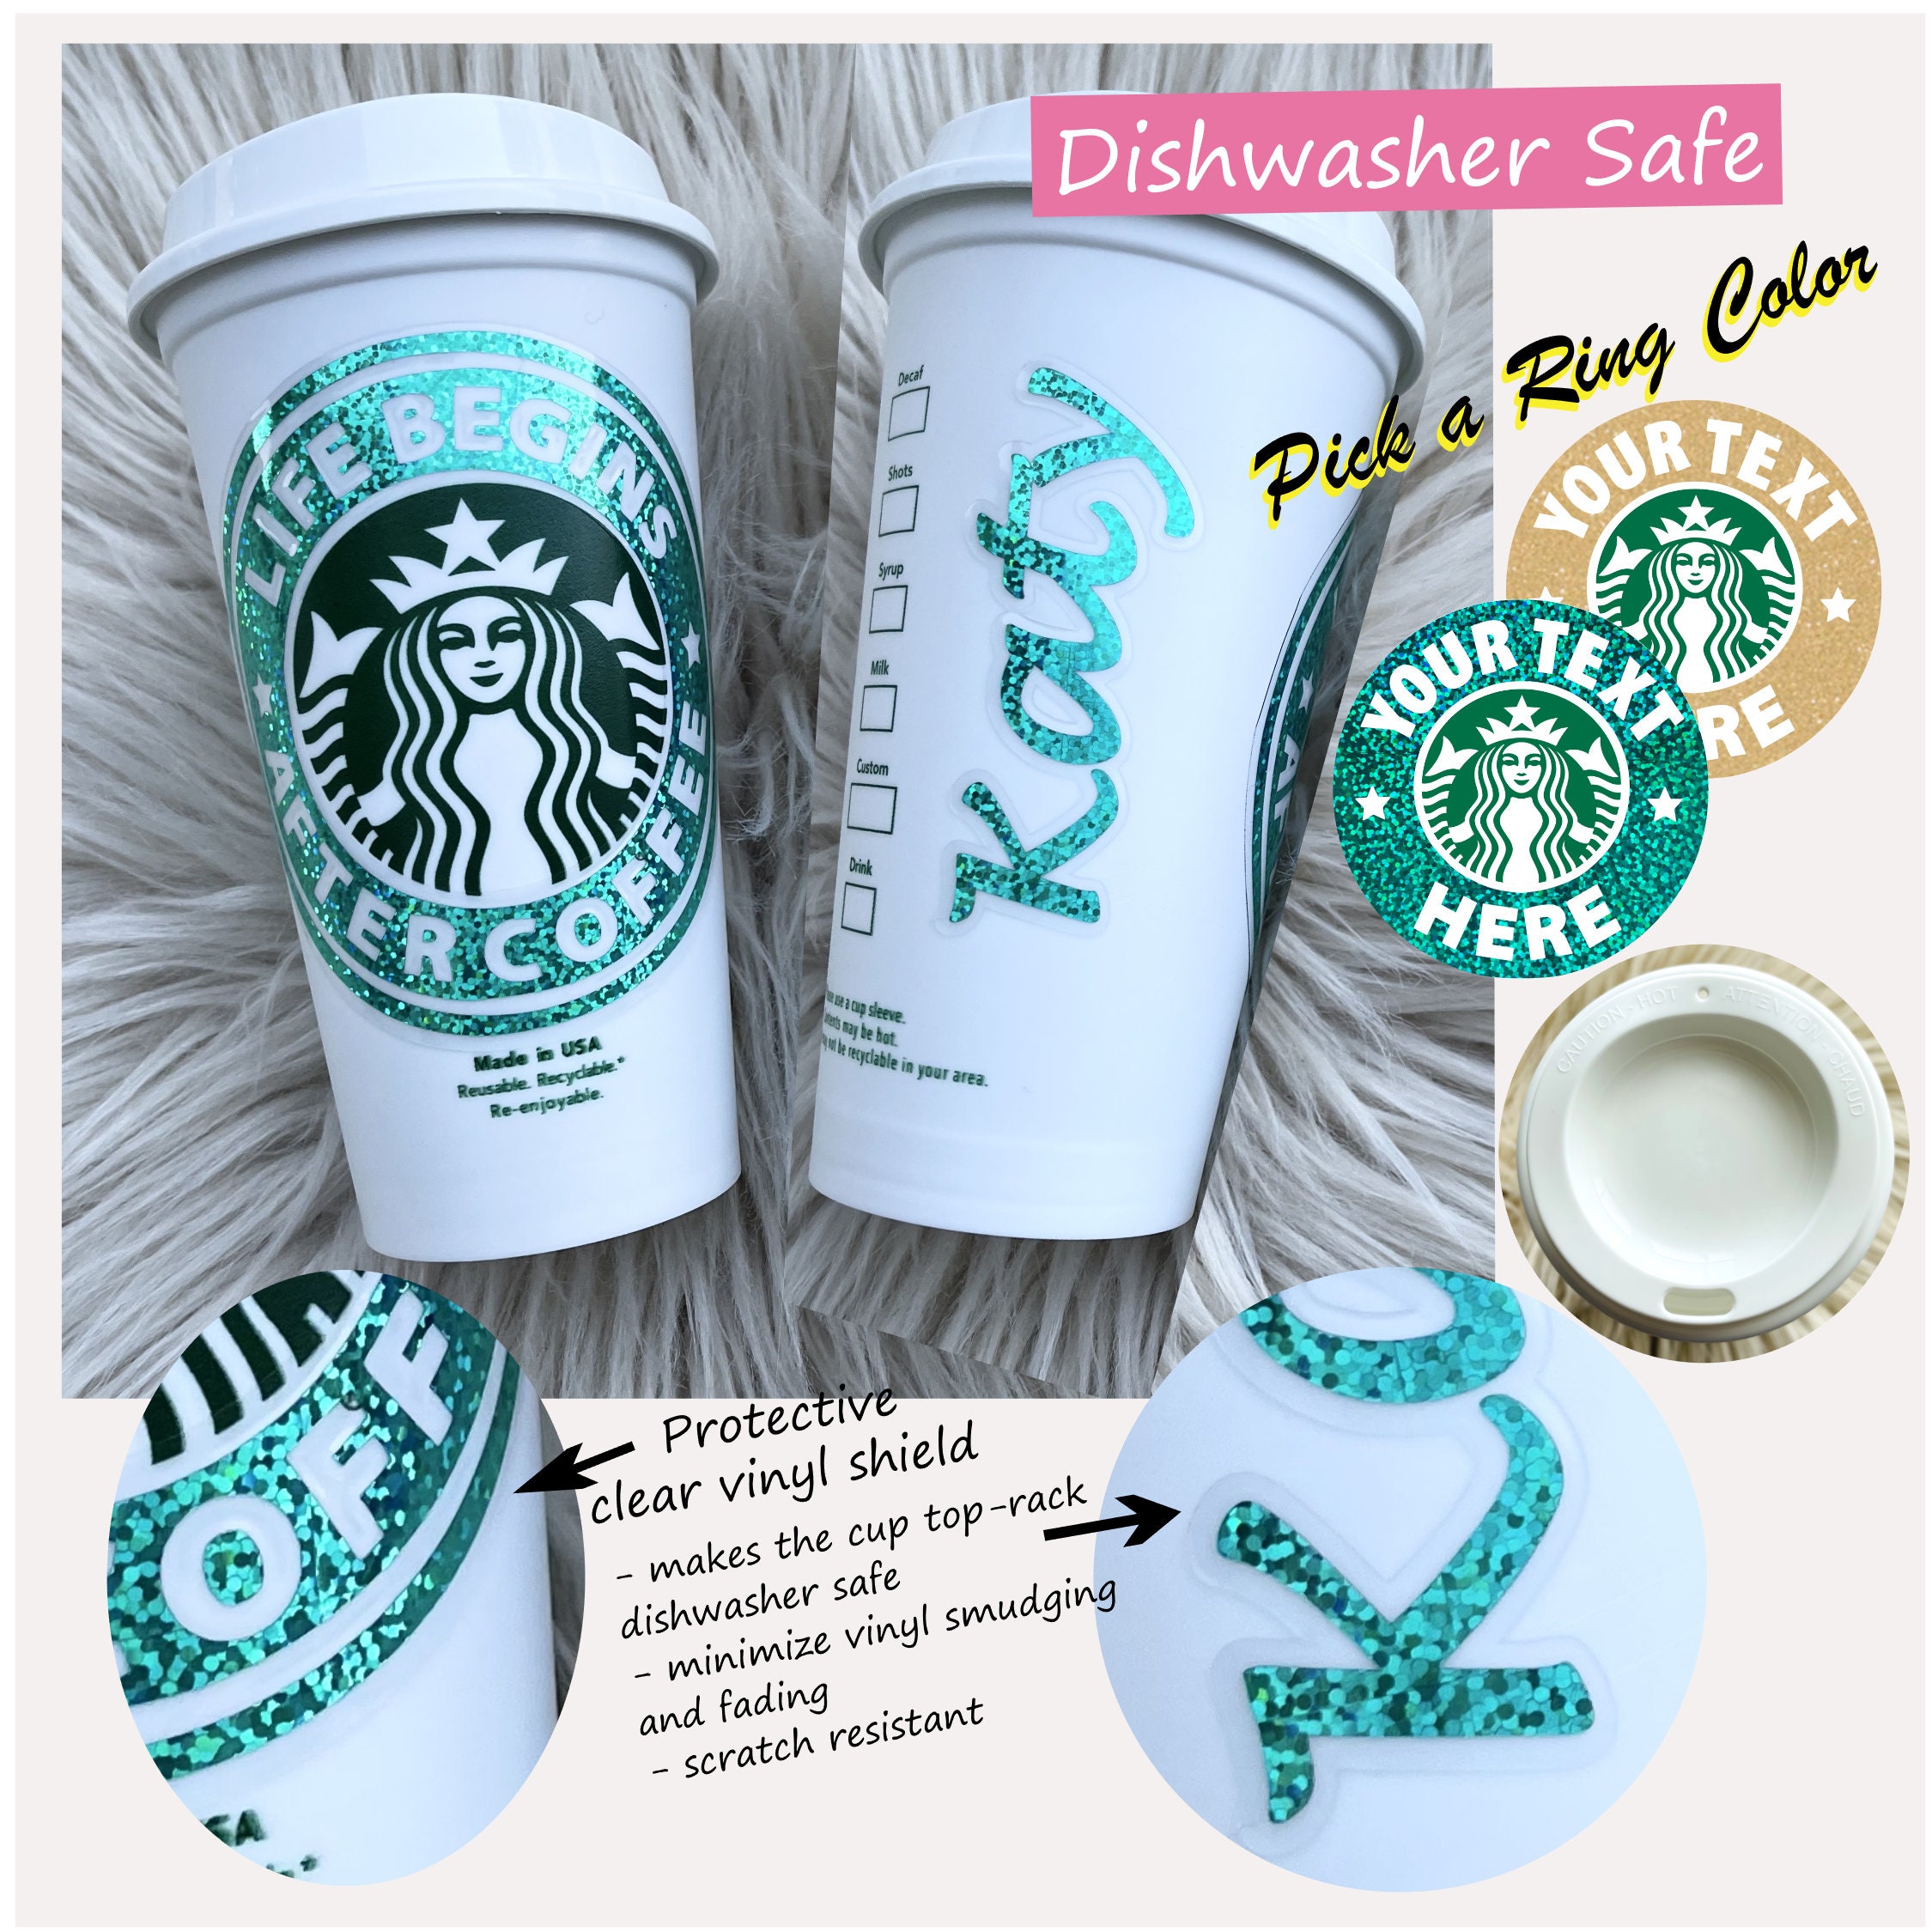 Personalized Authentic SB Reusable Coffee Cup 16 Ounces with Lid - Variety  of Colors Available - Ships Free - BPA Free Plastic